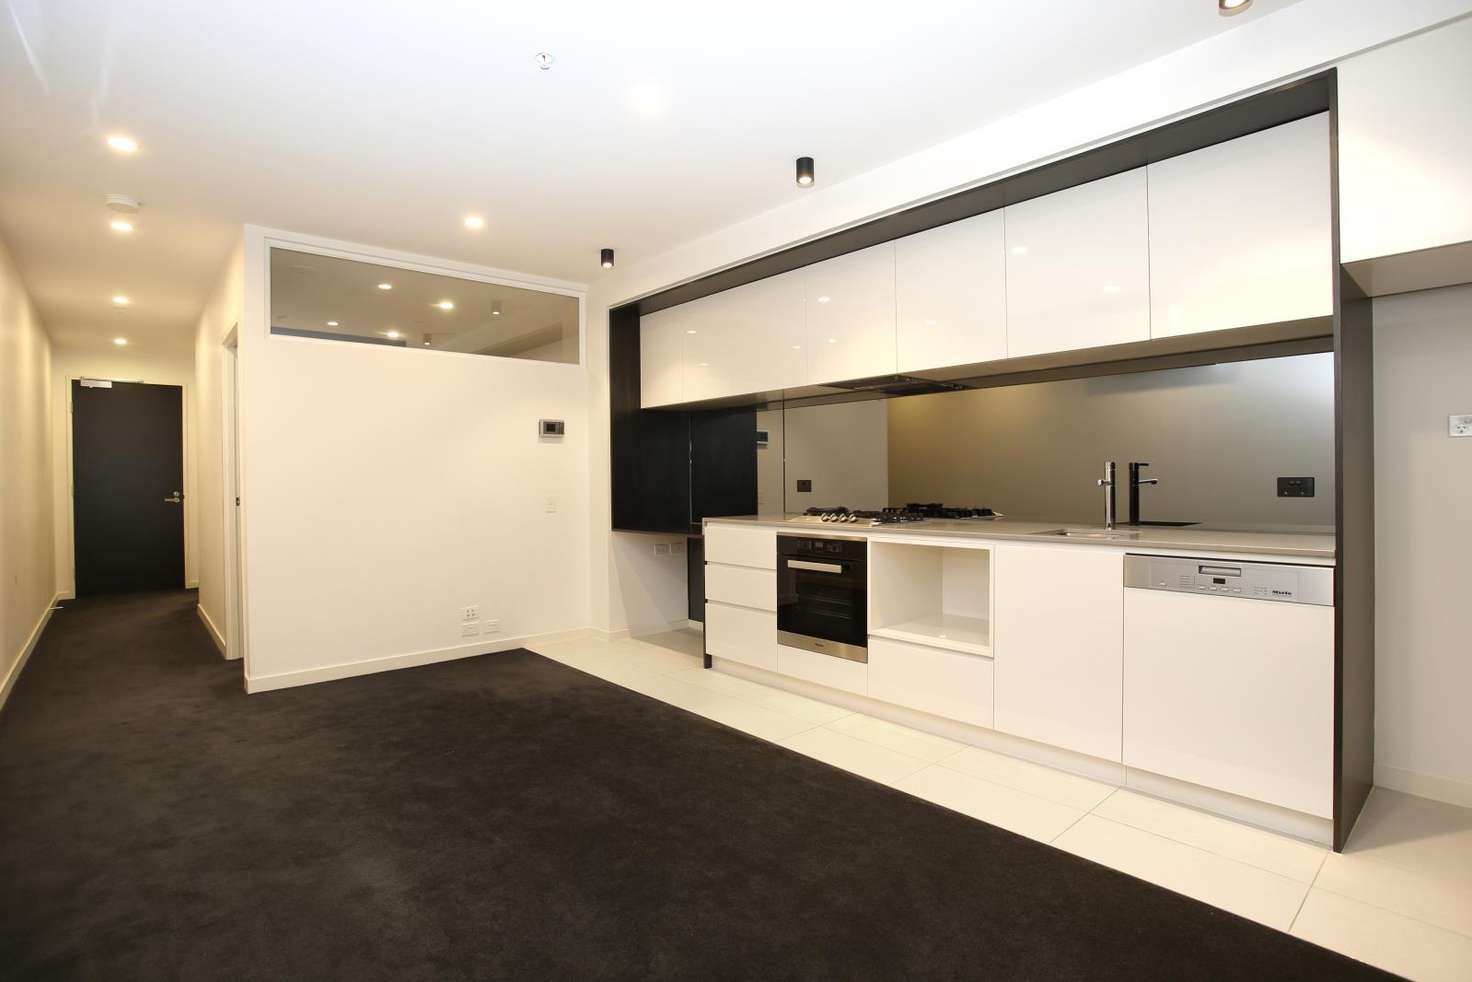 Main view of Homely apartment listing, 711/3 Yarra Street, South Yarra VIC 3141